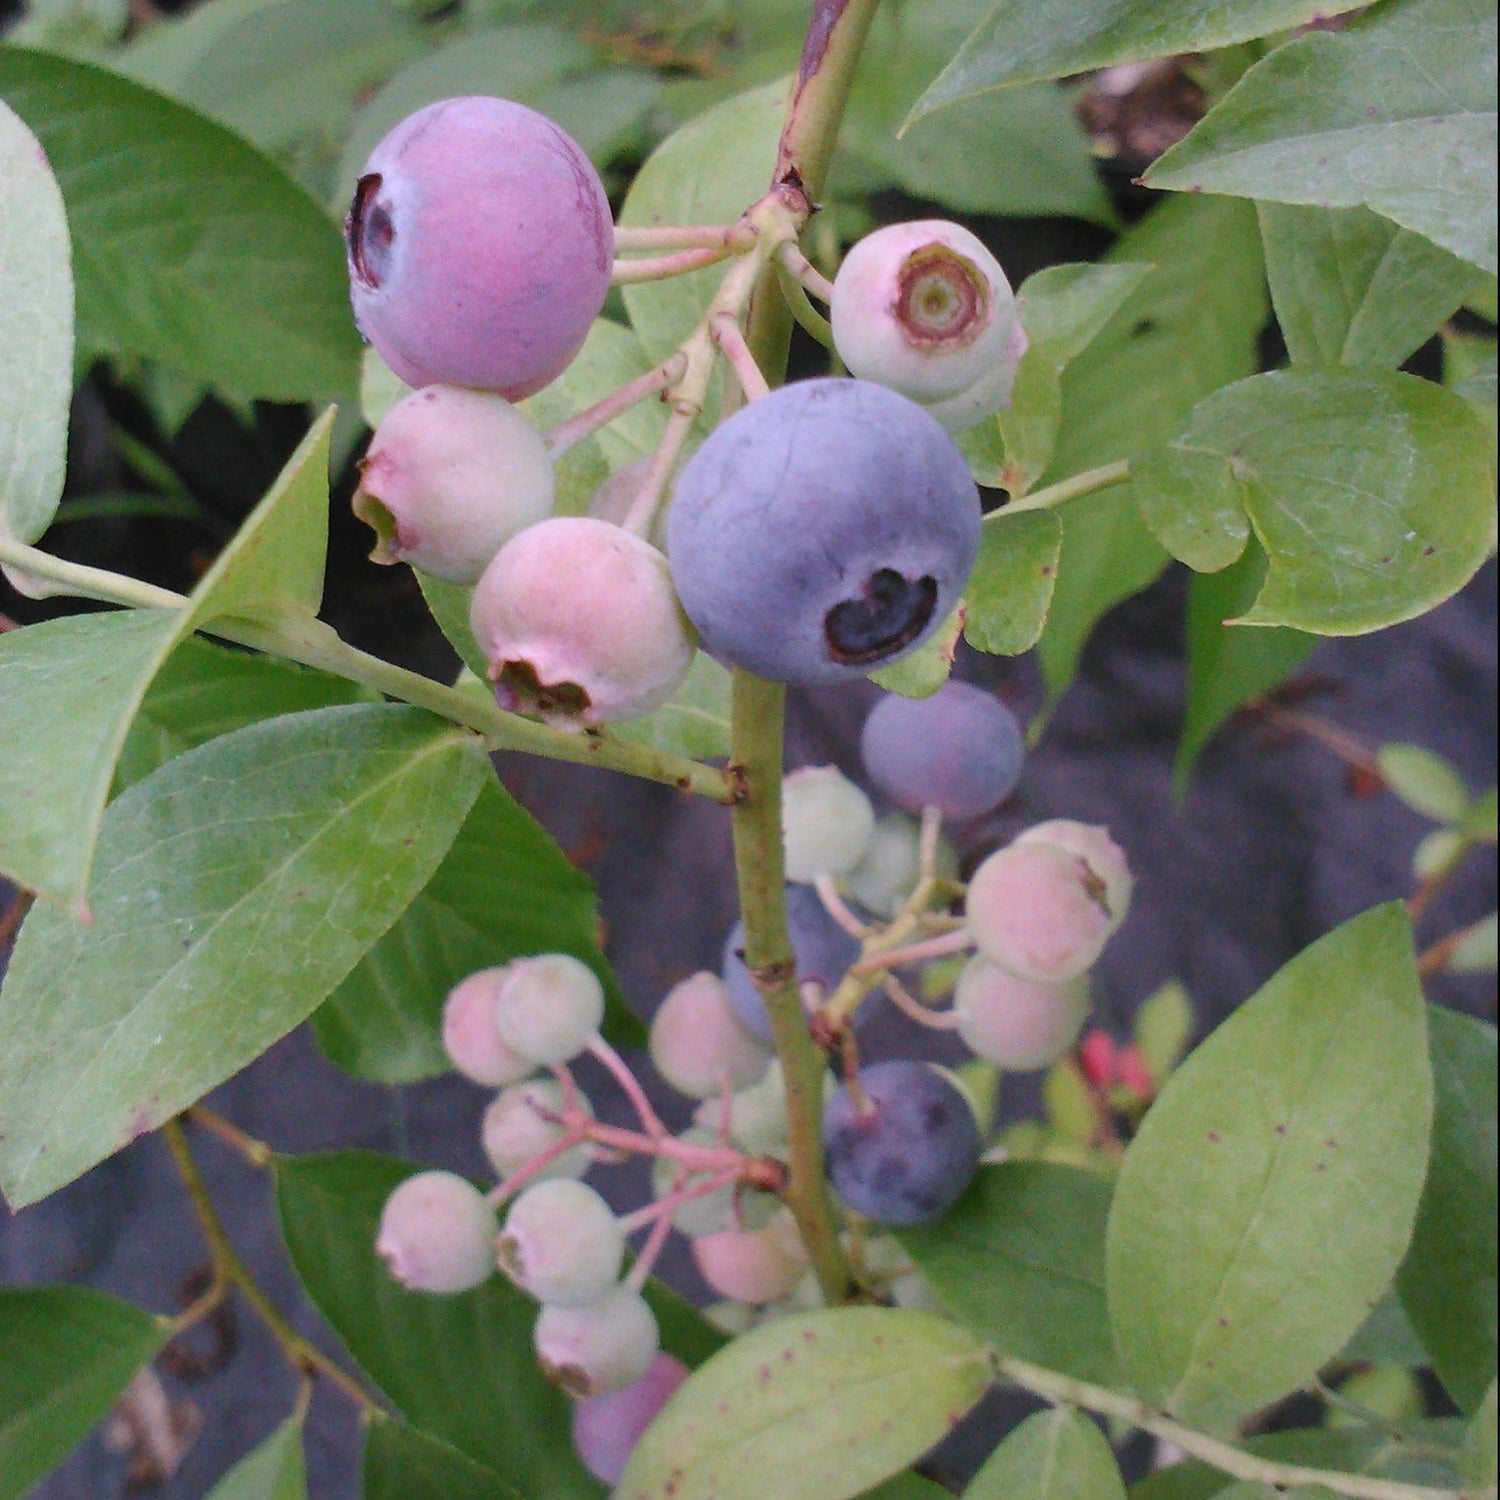 Ochlockonee Blueberry Bush, Berries Are a Deep Blue Color That Isfirm and Keeps Well